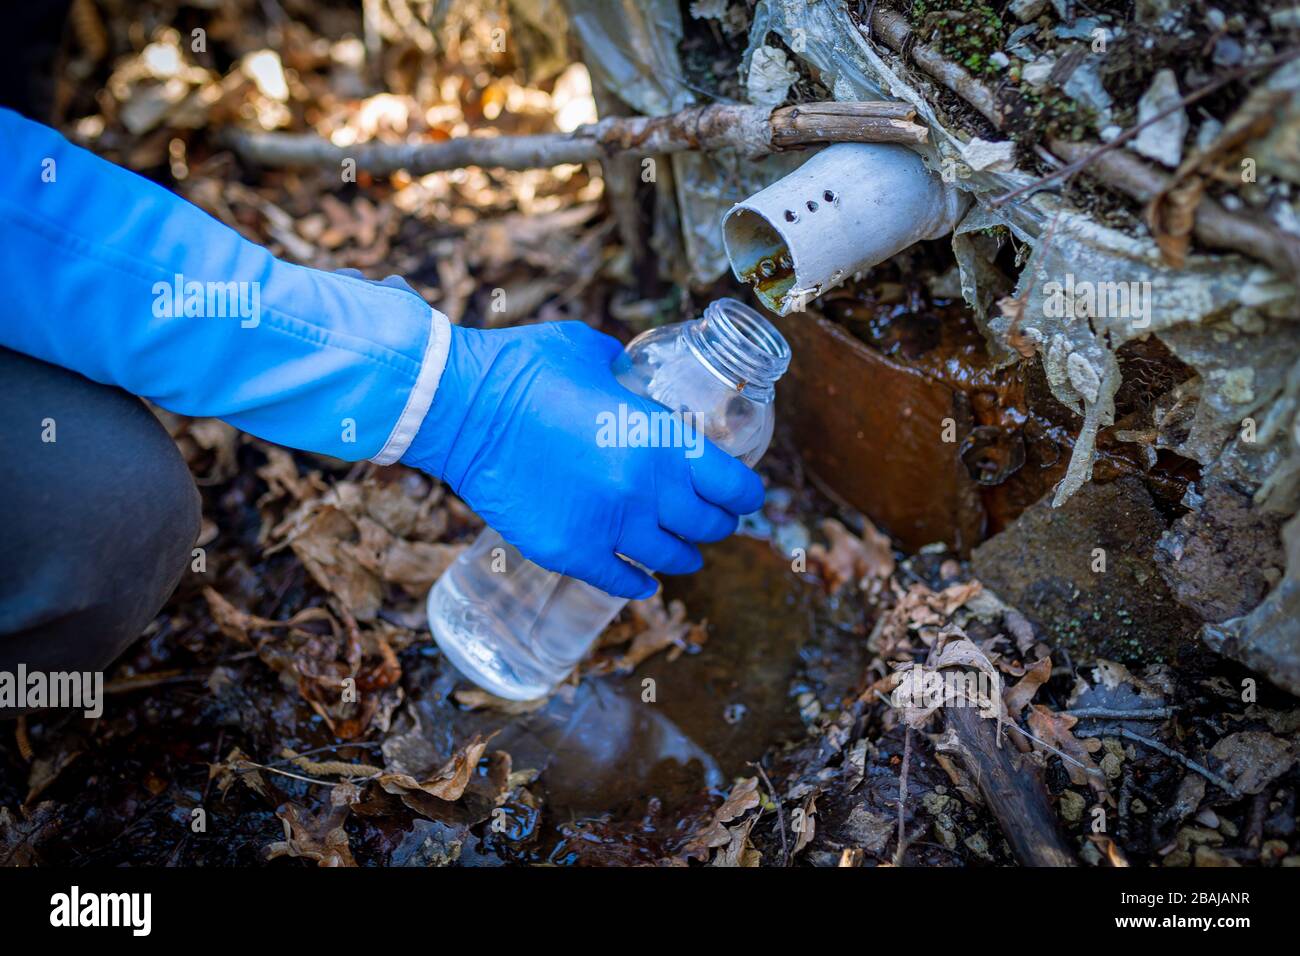 Ecologist taking water samples from a natural source in protective gloves Stock Photo